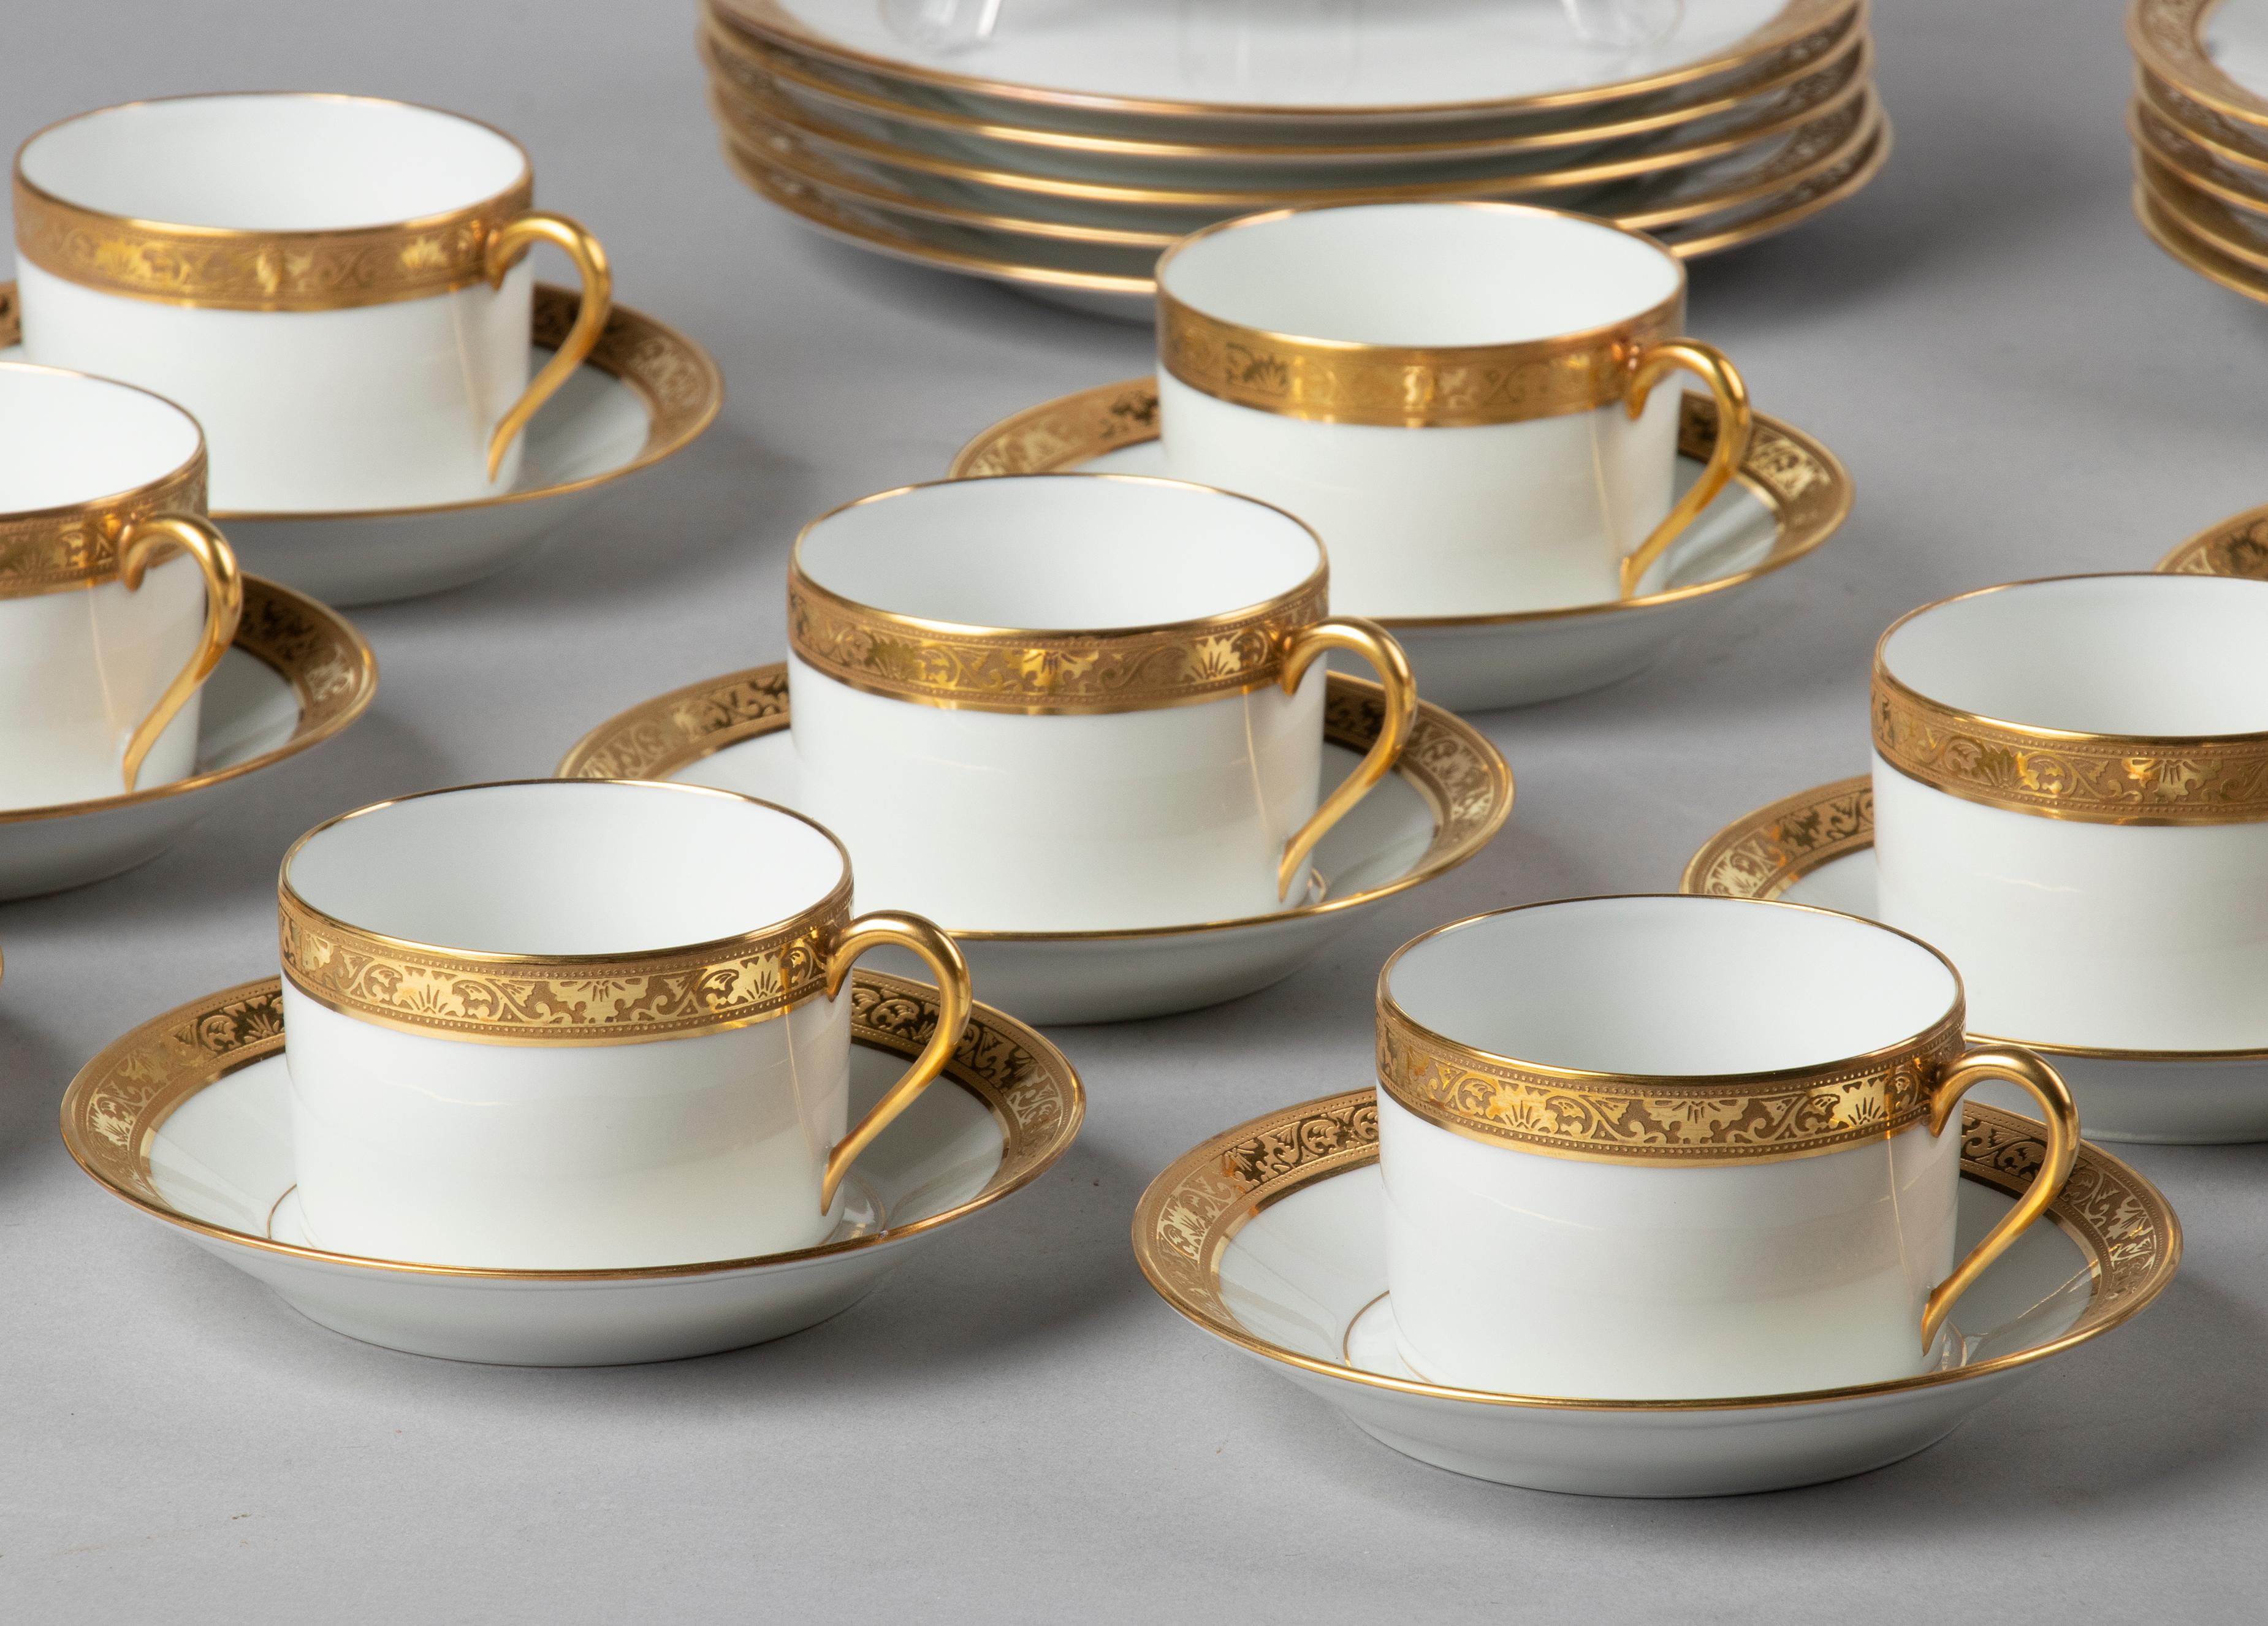 Beautiful set of 12 porcelain cups and saucers with 12 pastry plates, by the French brand Rauynaud Limoges. The porcelain is decorated with beautiful gold-coloured inlaid edges. The service is in very good condition. No damage and the gold-coloured